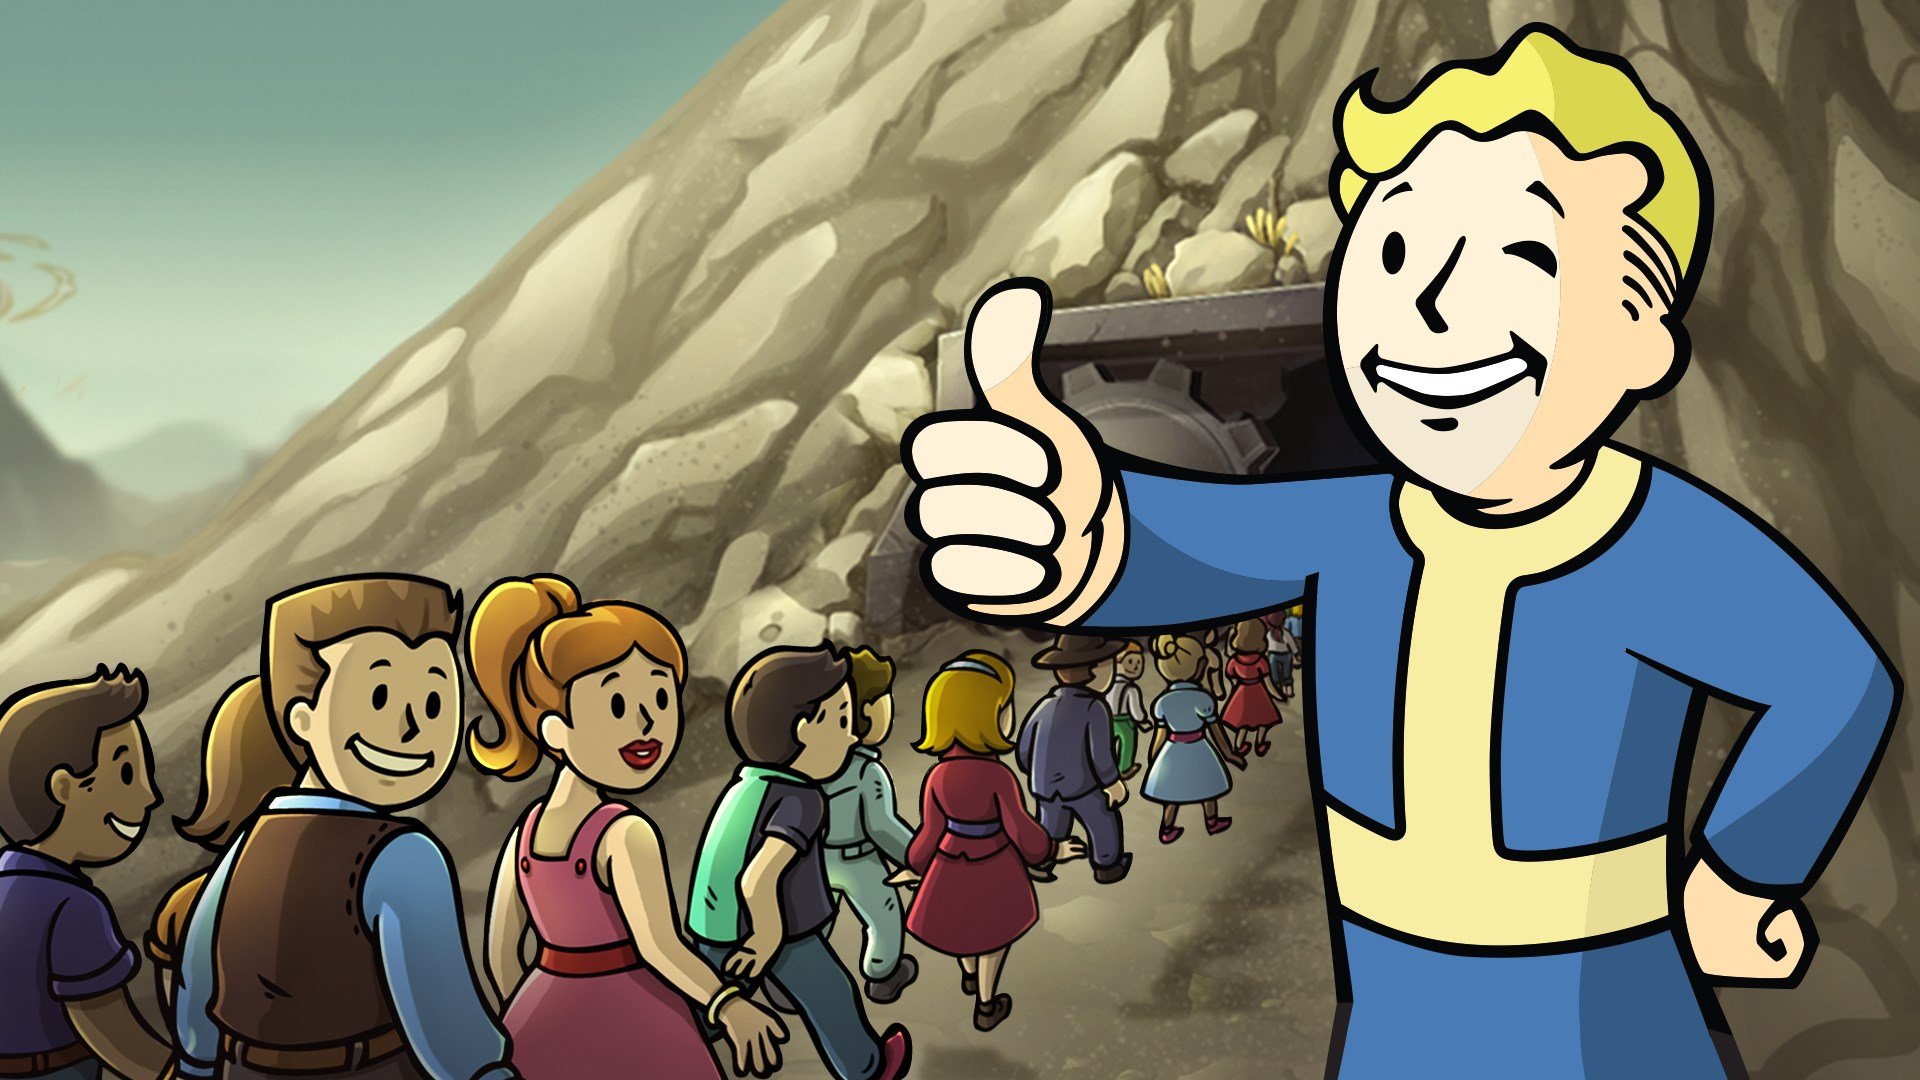 Fallout Shelter cover image